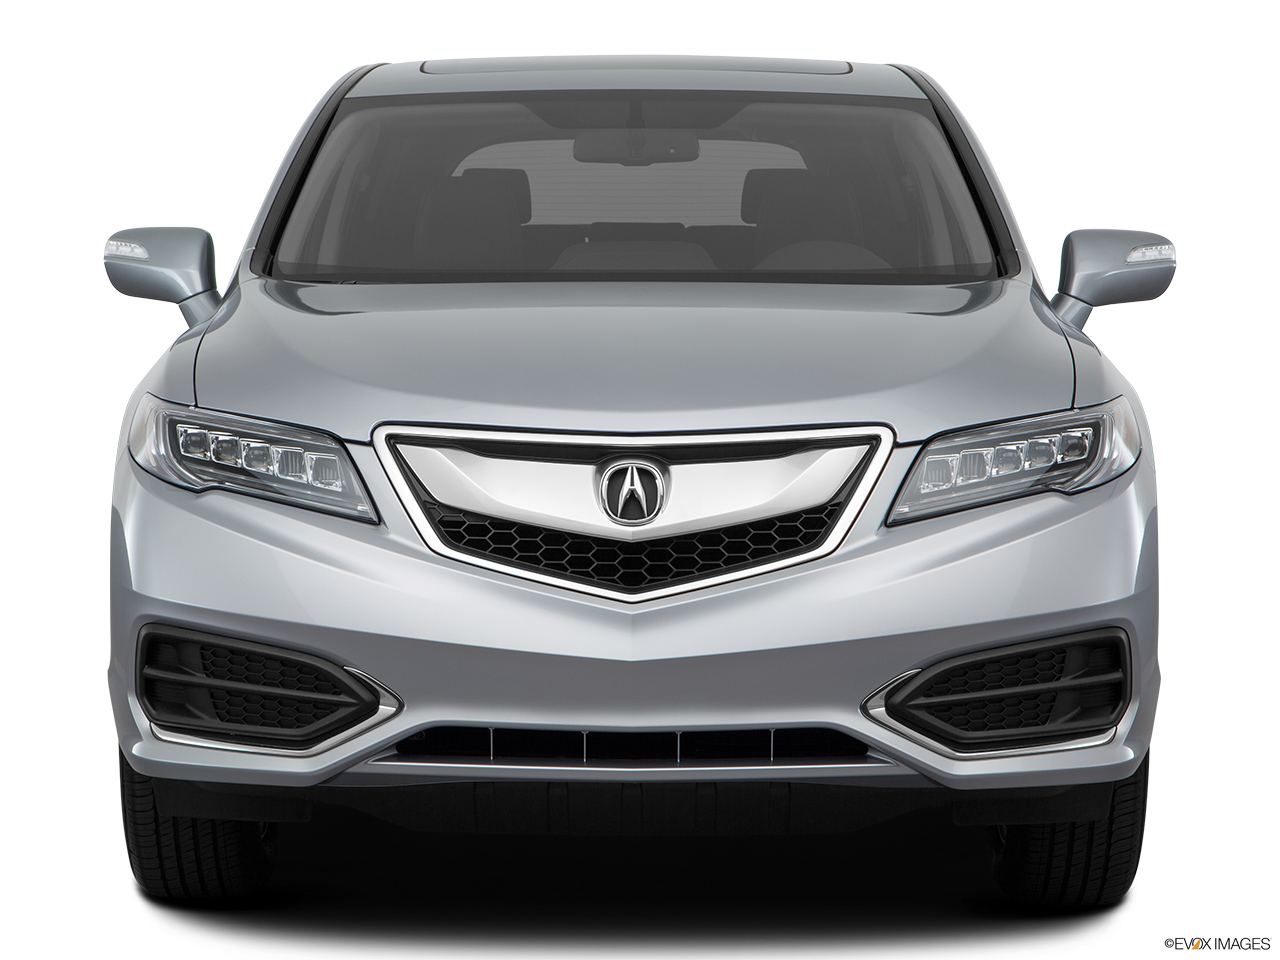 2017 Acura RDX AWD Low/wide front. 